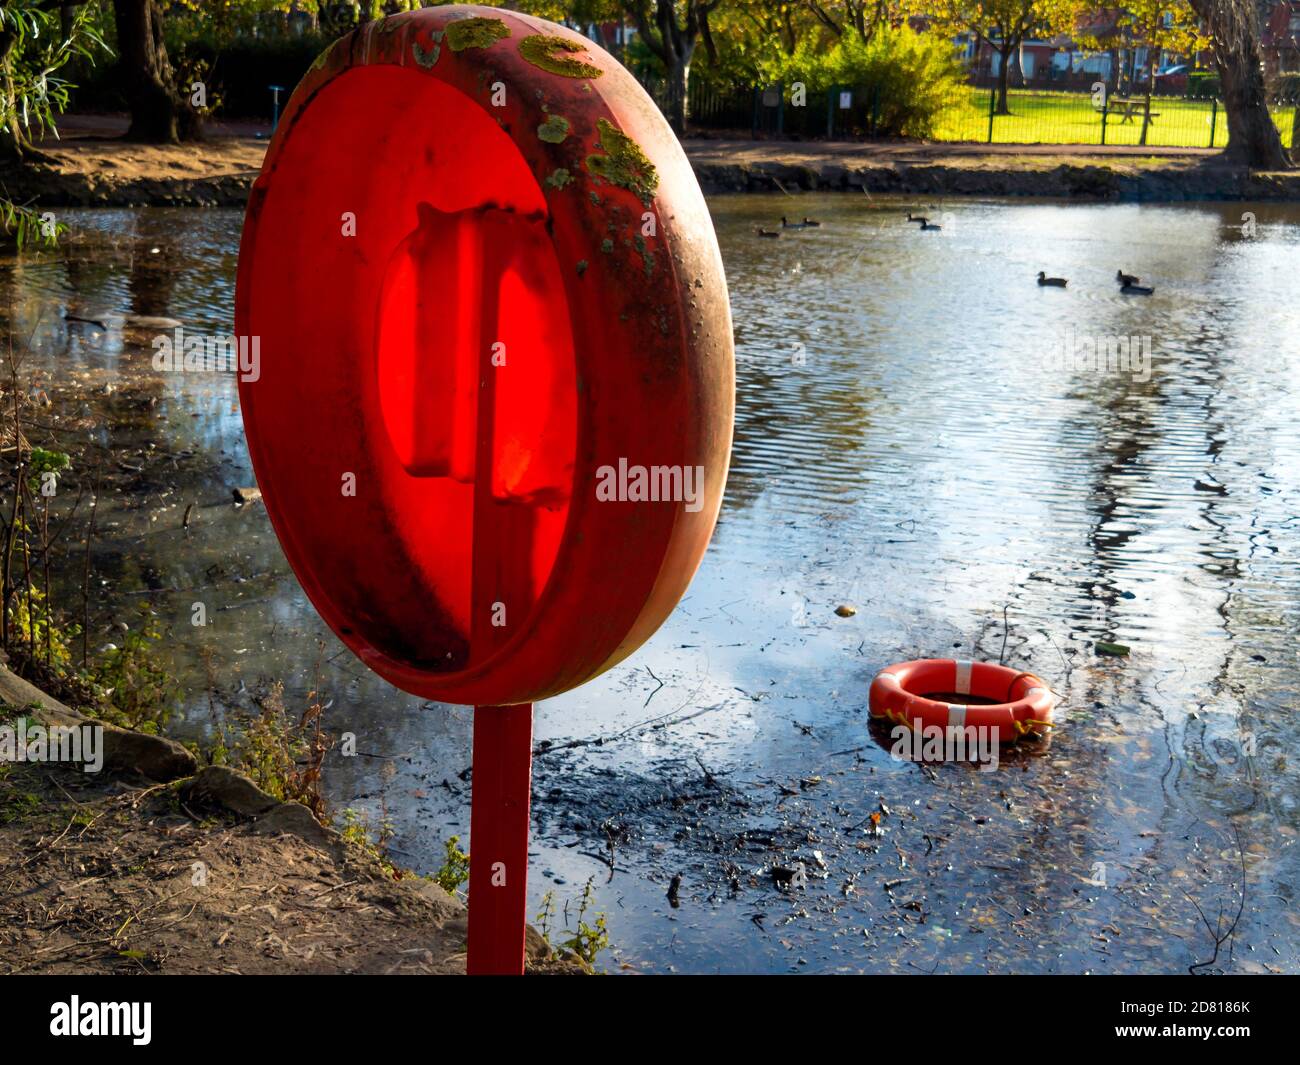 A lifebelt as a safety measure by a lake in a public park made useless by having been vandalized and thrown out of reach into the water Stock Photo